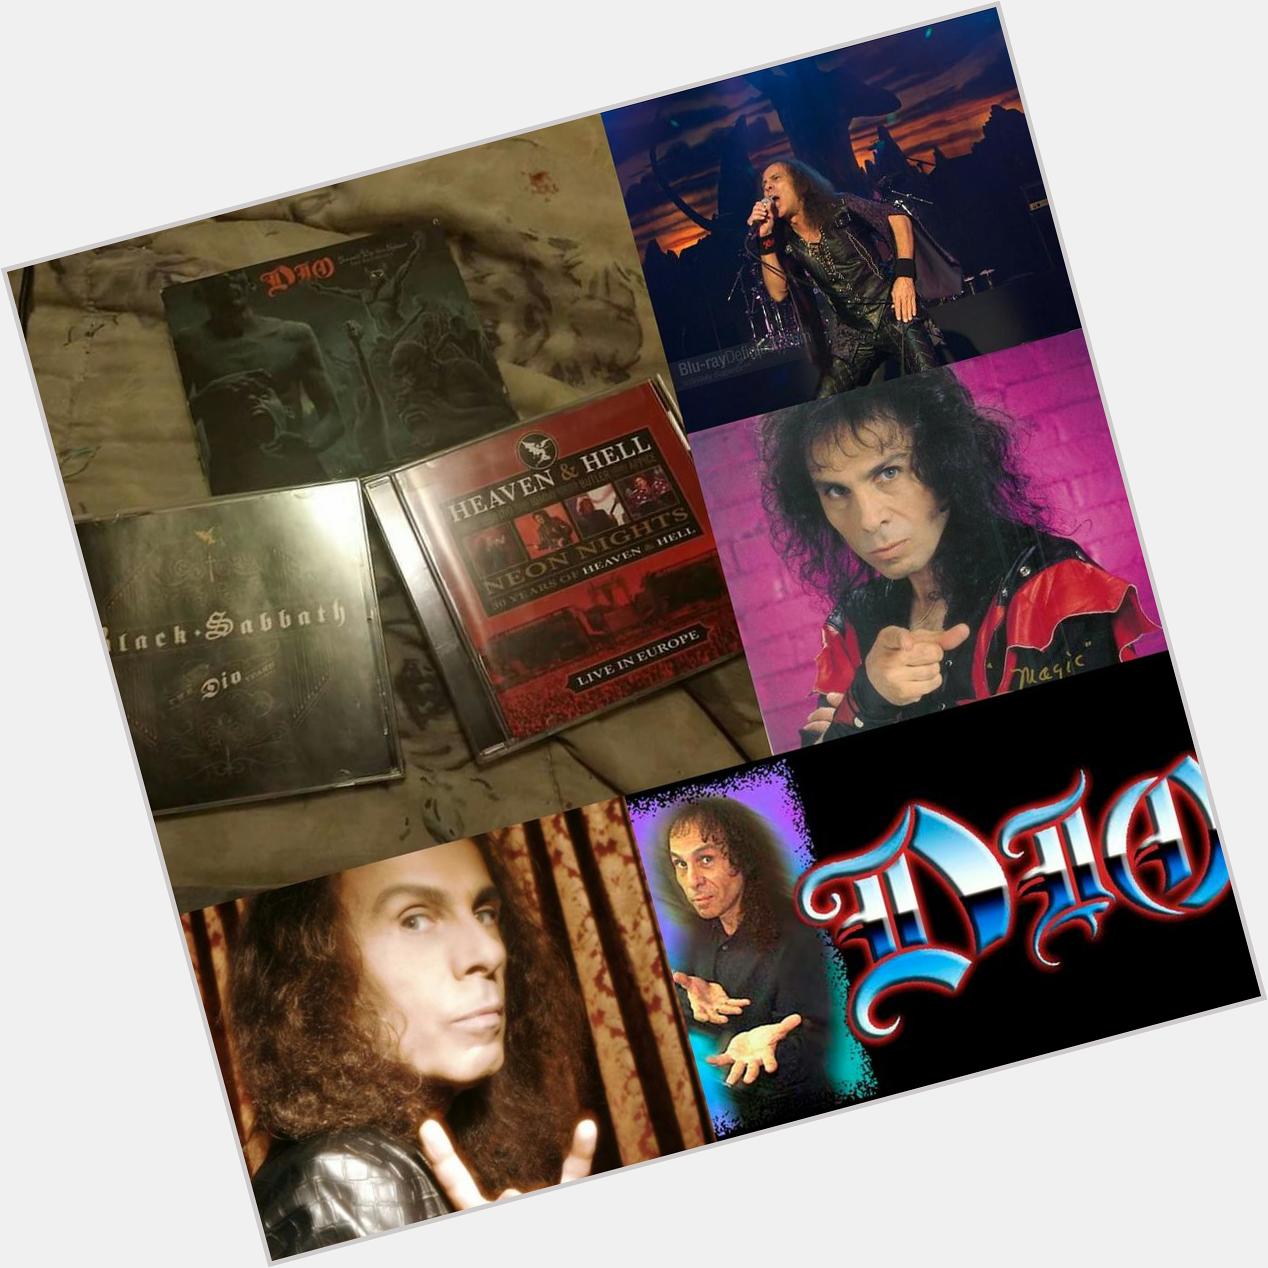 Happy birthday to the late Ronnie james DiO listening to Dio/Black Sabbath/Heaven&Hell today R.l.P DiO. \\m/ 